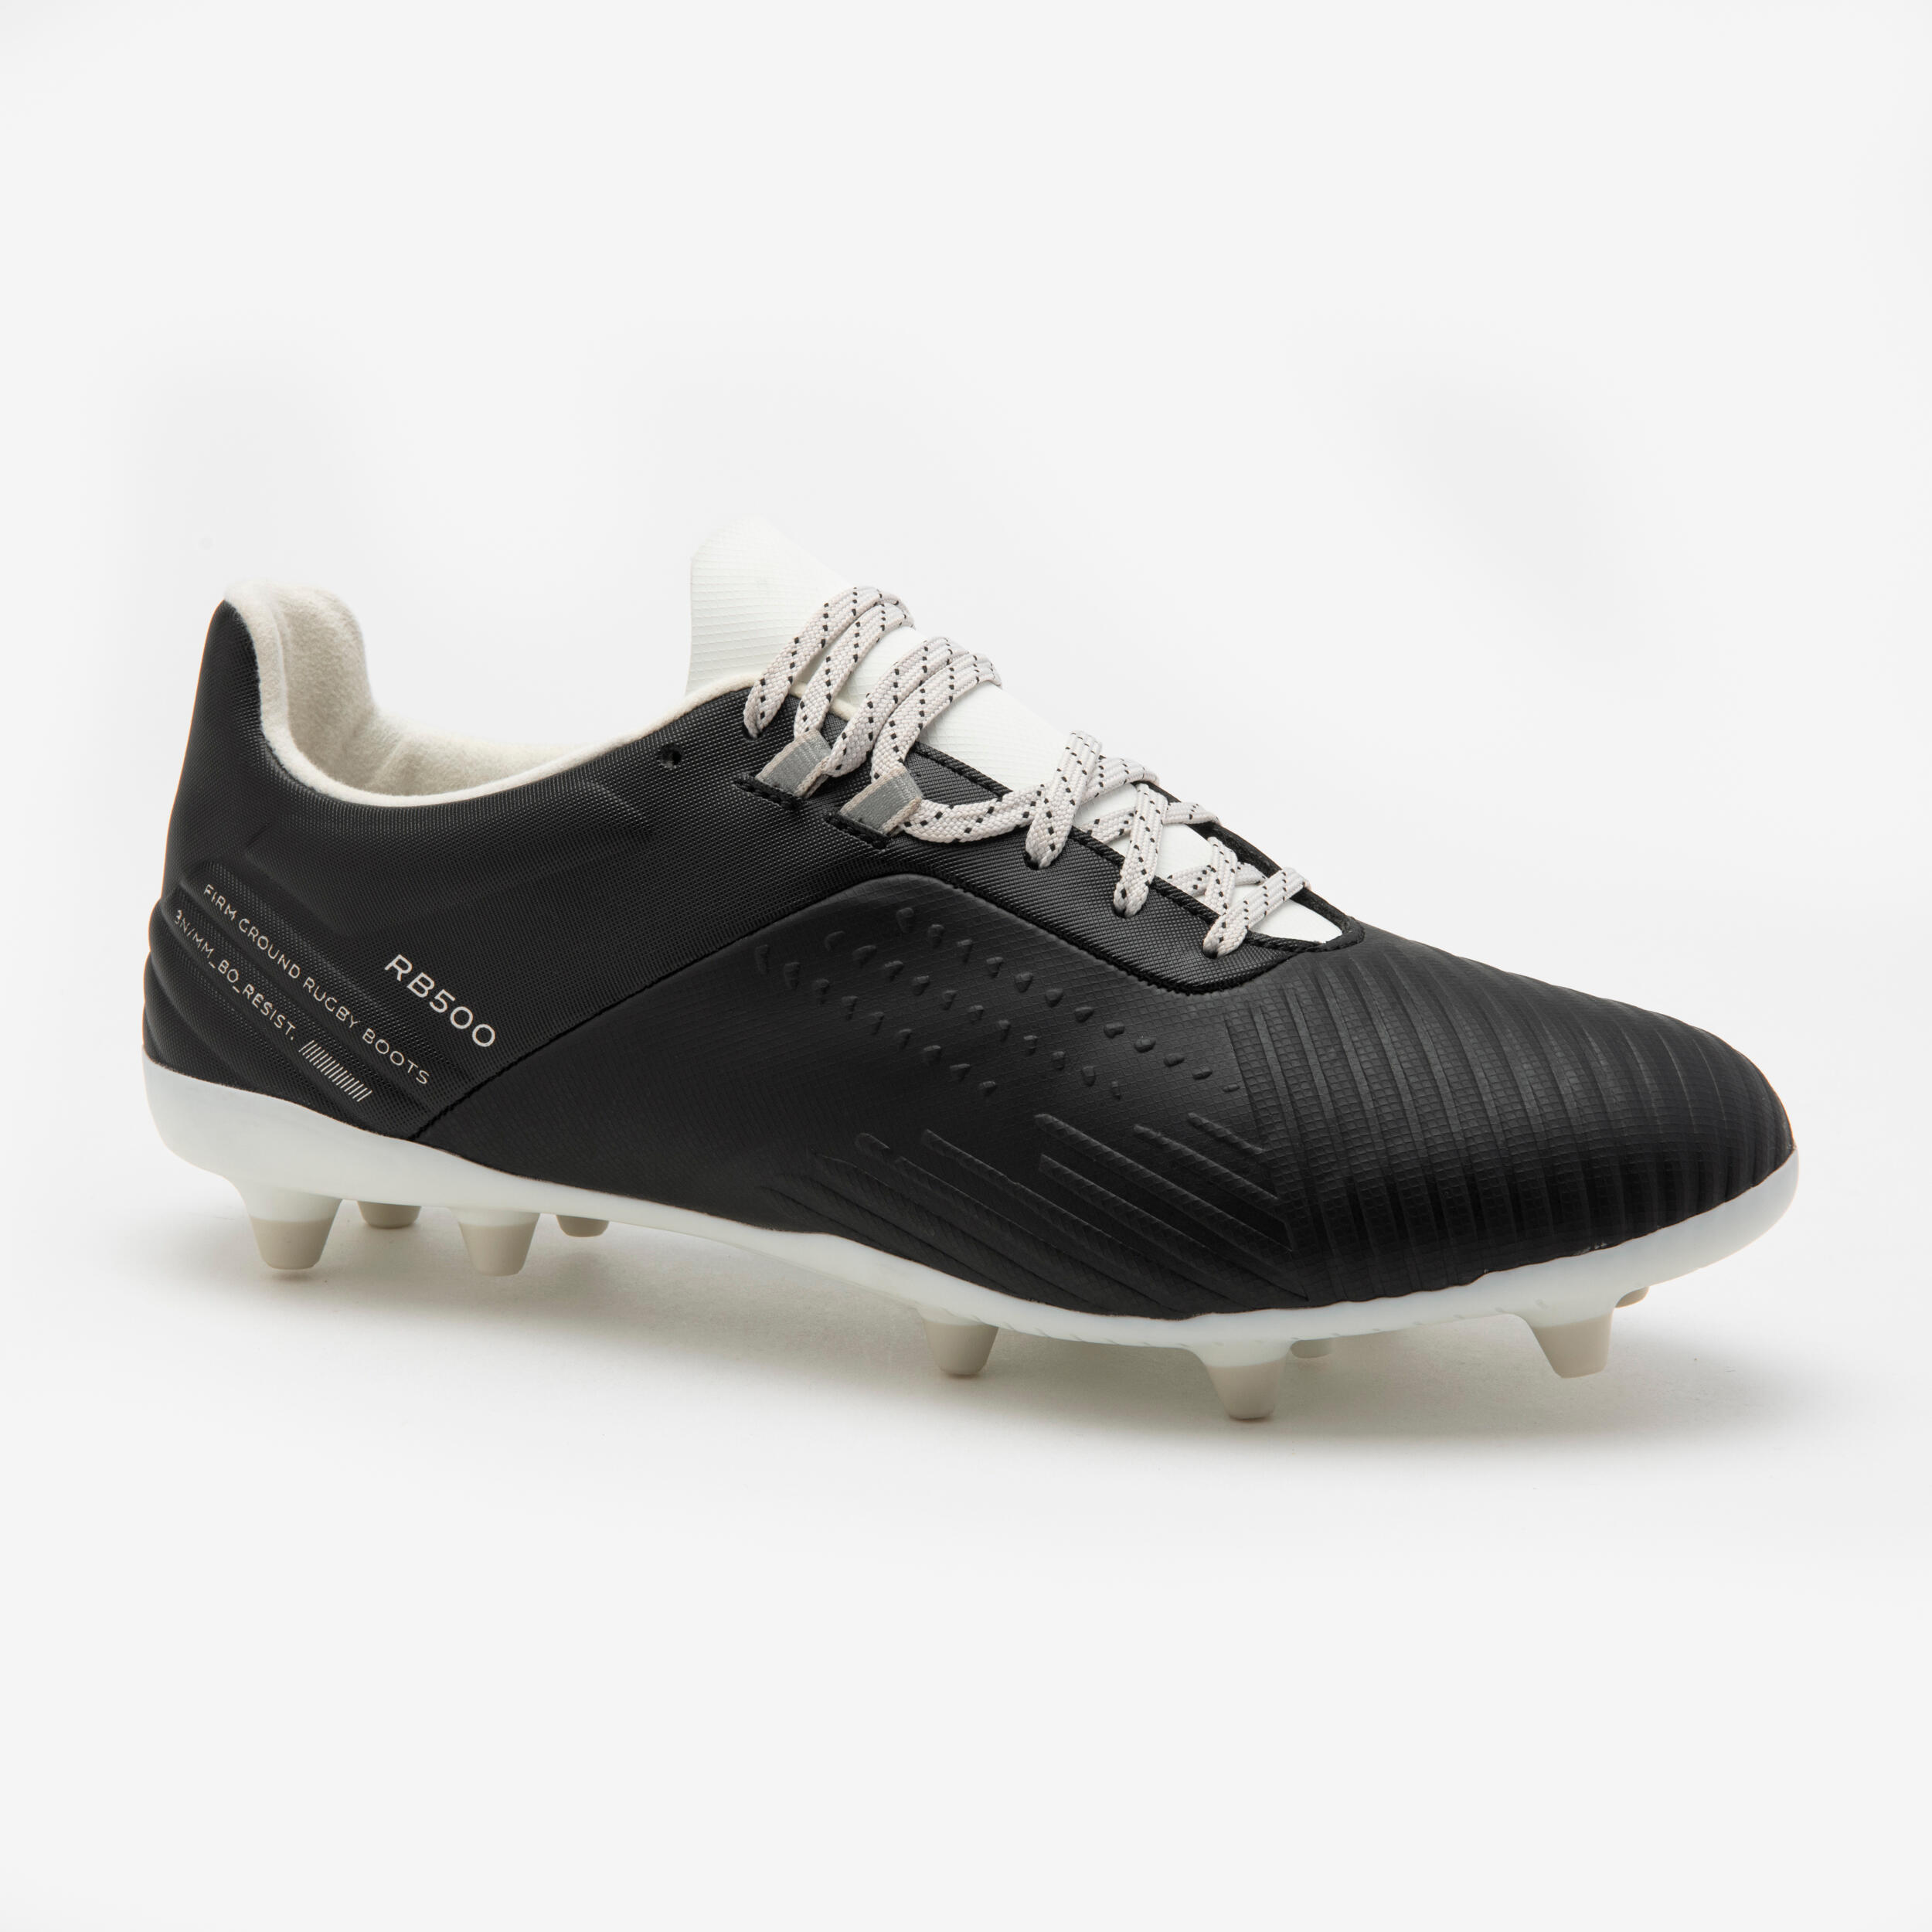 OFFLOAD Adult Rugby Boots Advance R500 FG - Black